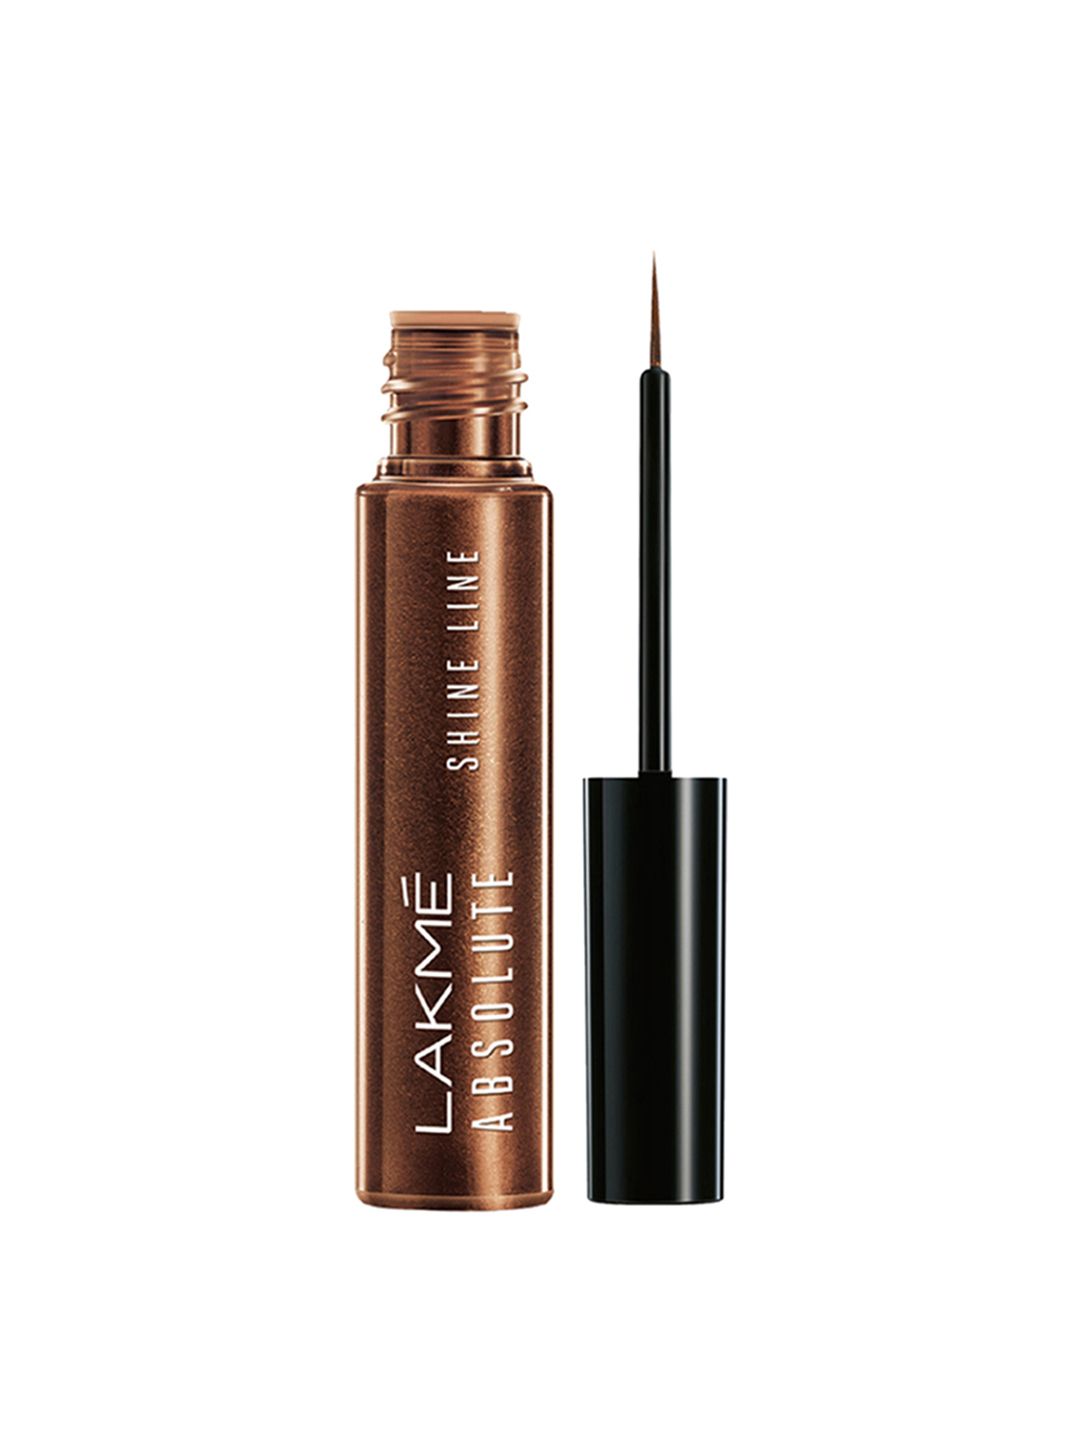 Lakme Absolute Shine Line Eyeliner - Shimmery Bronze Price in India